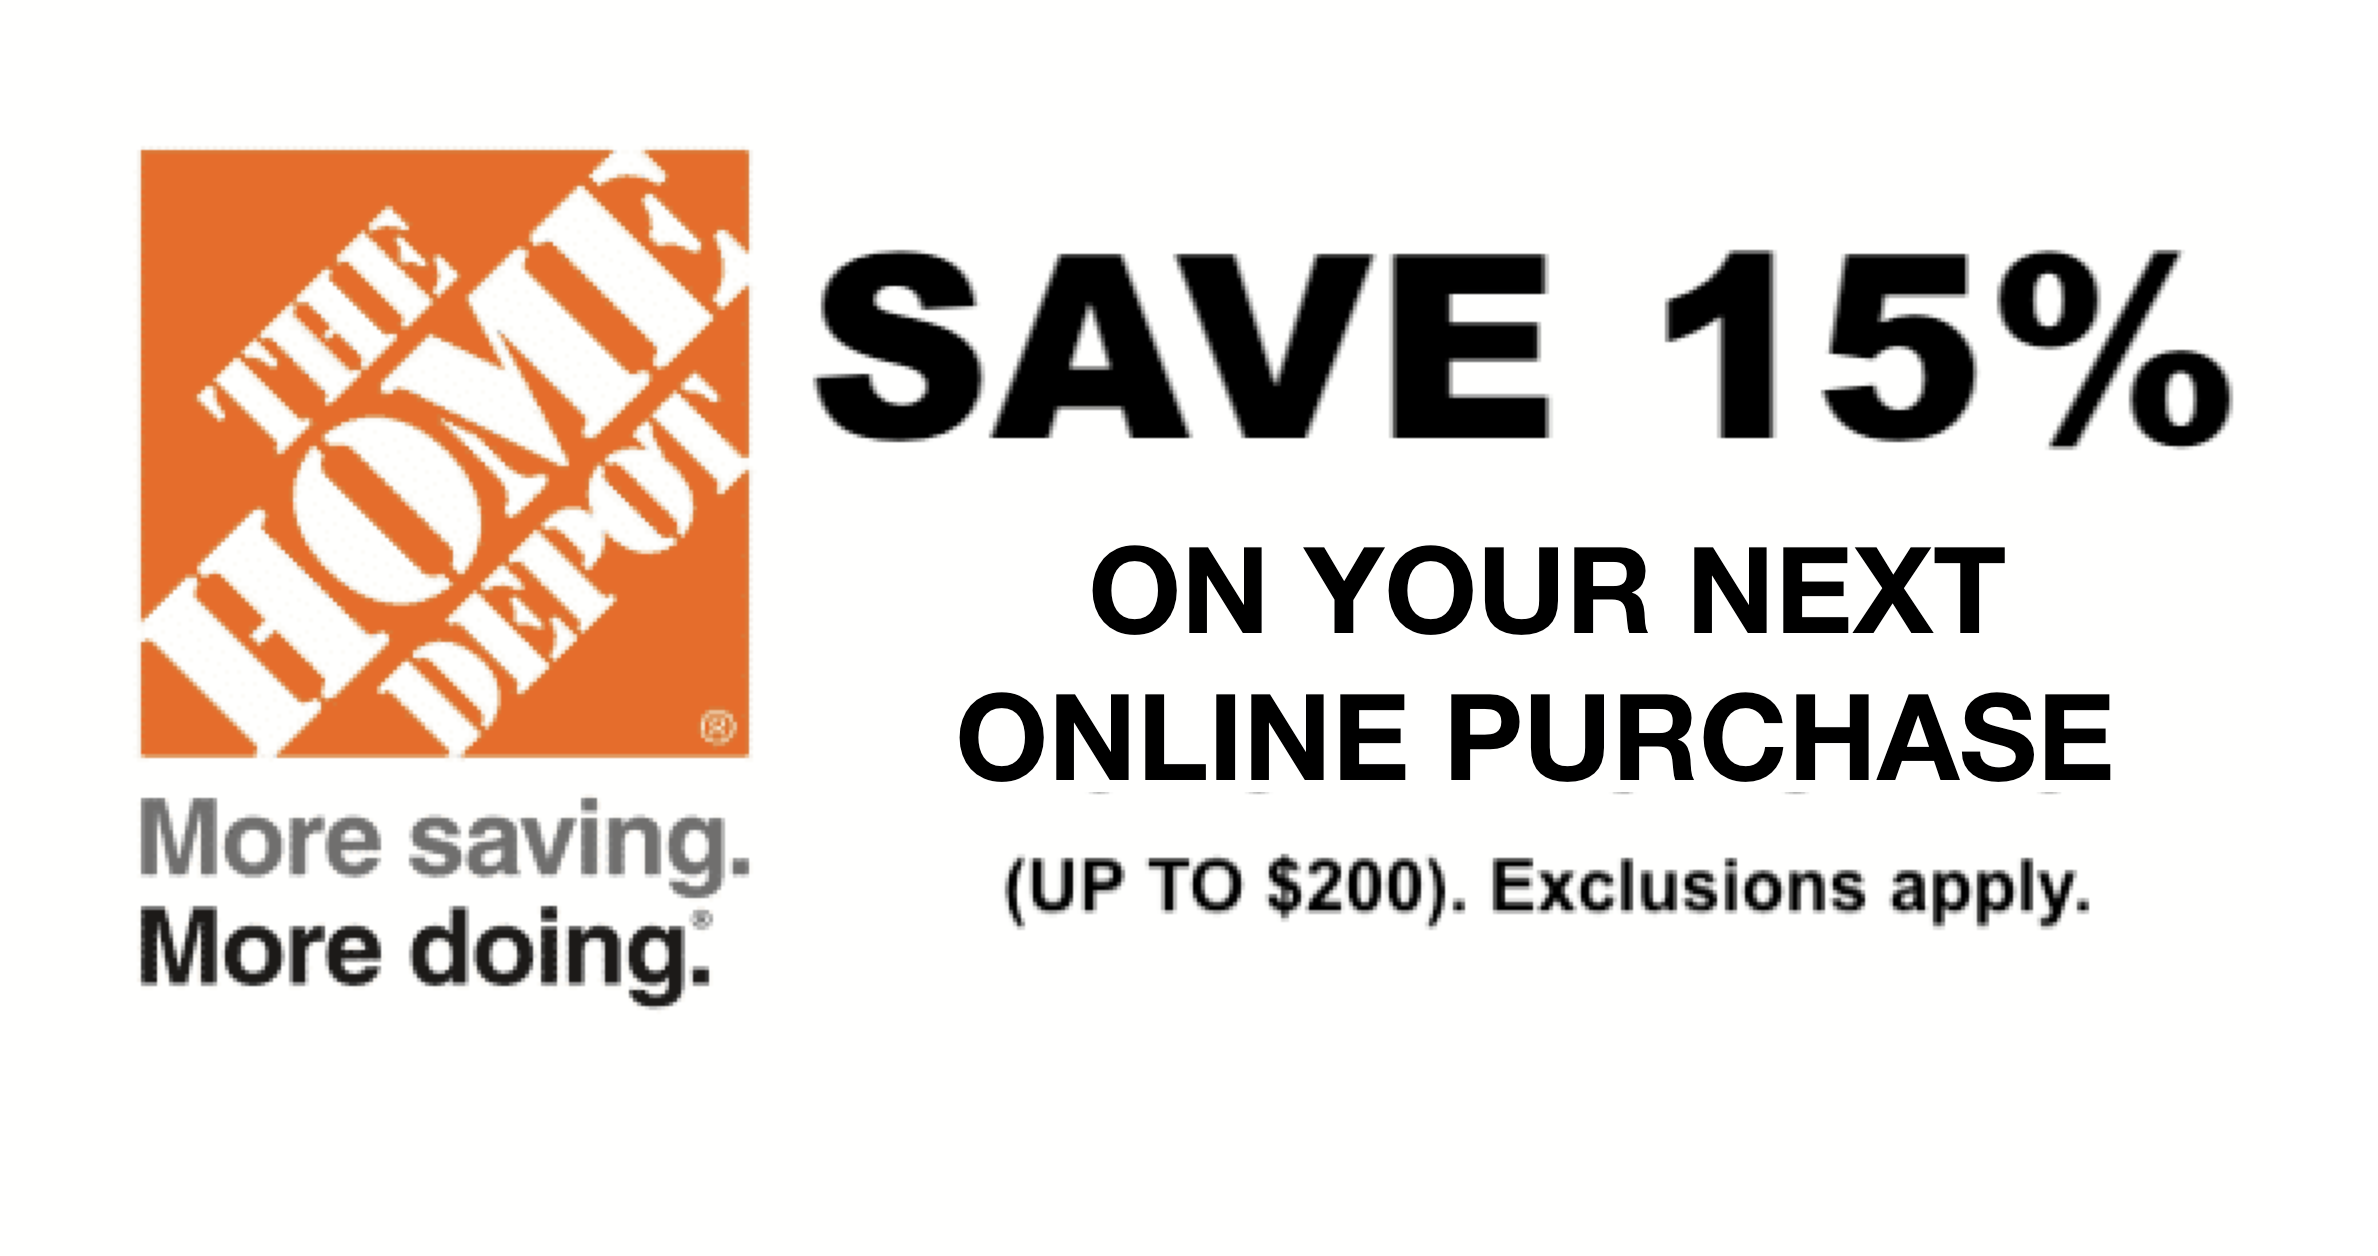 1x ONE HD Home Depot 15% OFF 1-C0UPON FAST!! 0NLINE-ONLY INSTANT 